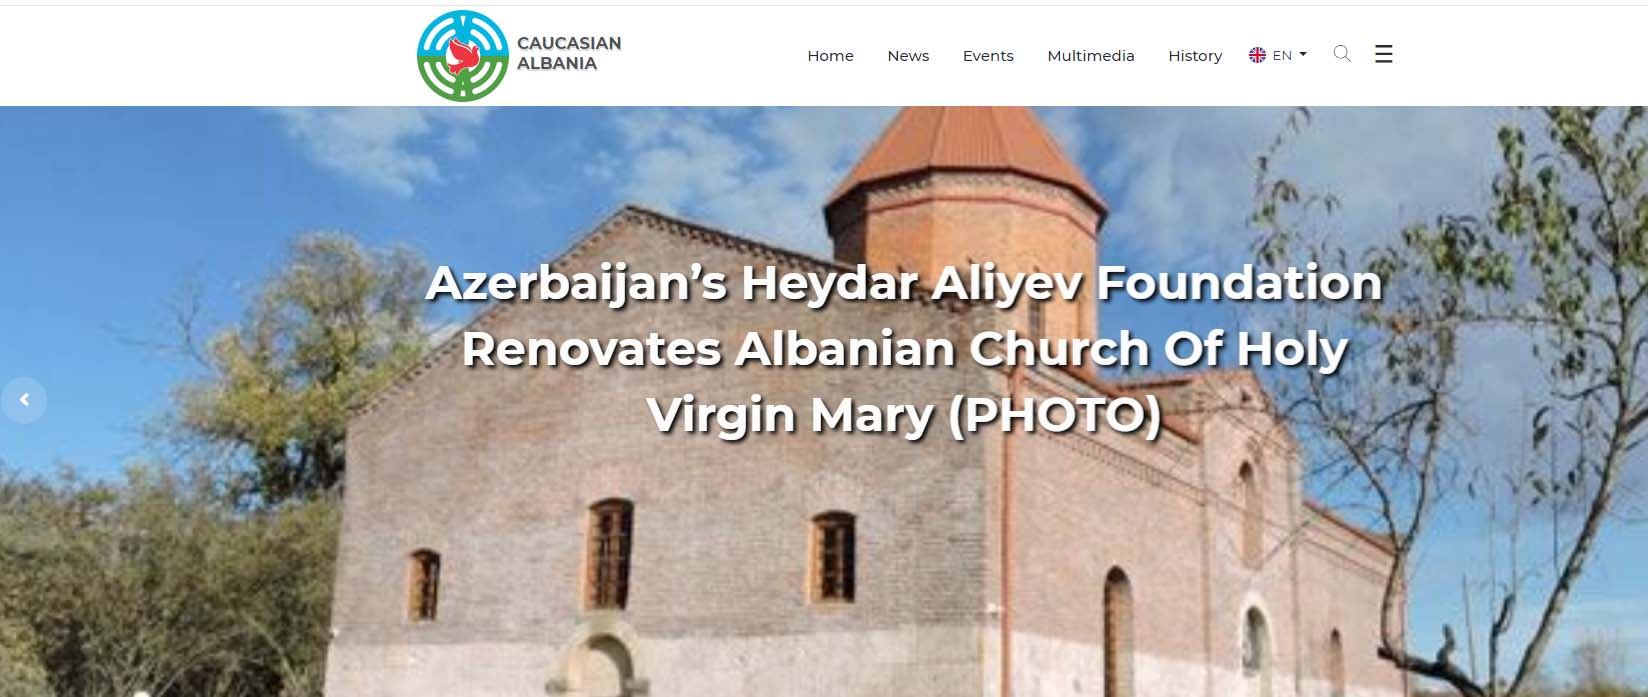 Website on heritage of Caucasian Albania launched (PHOTO)